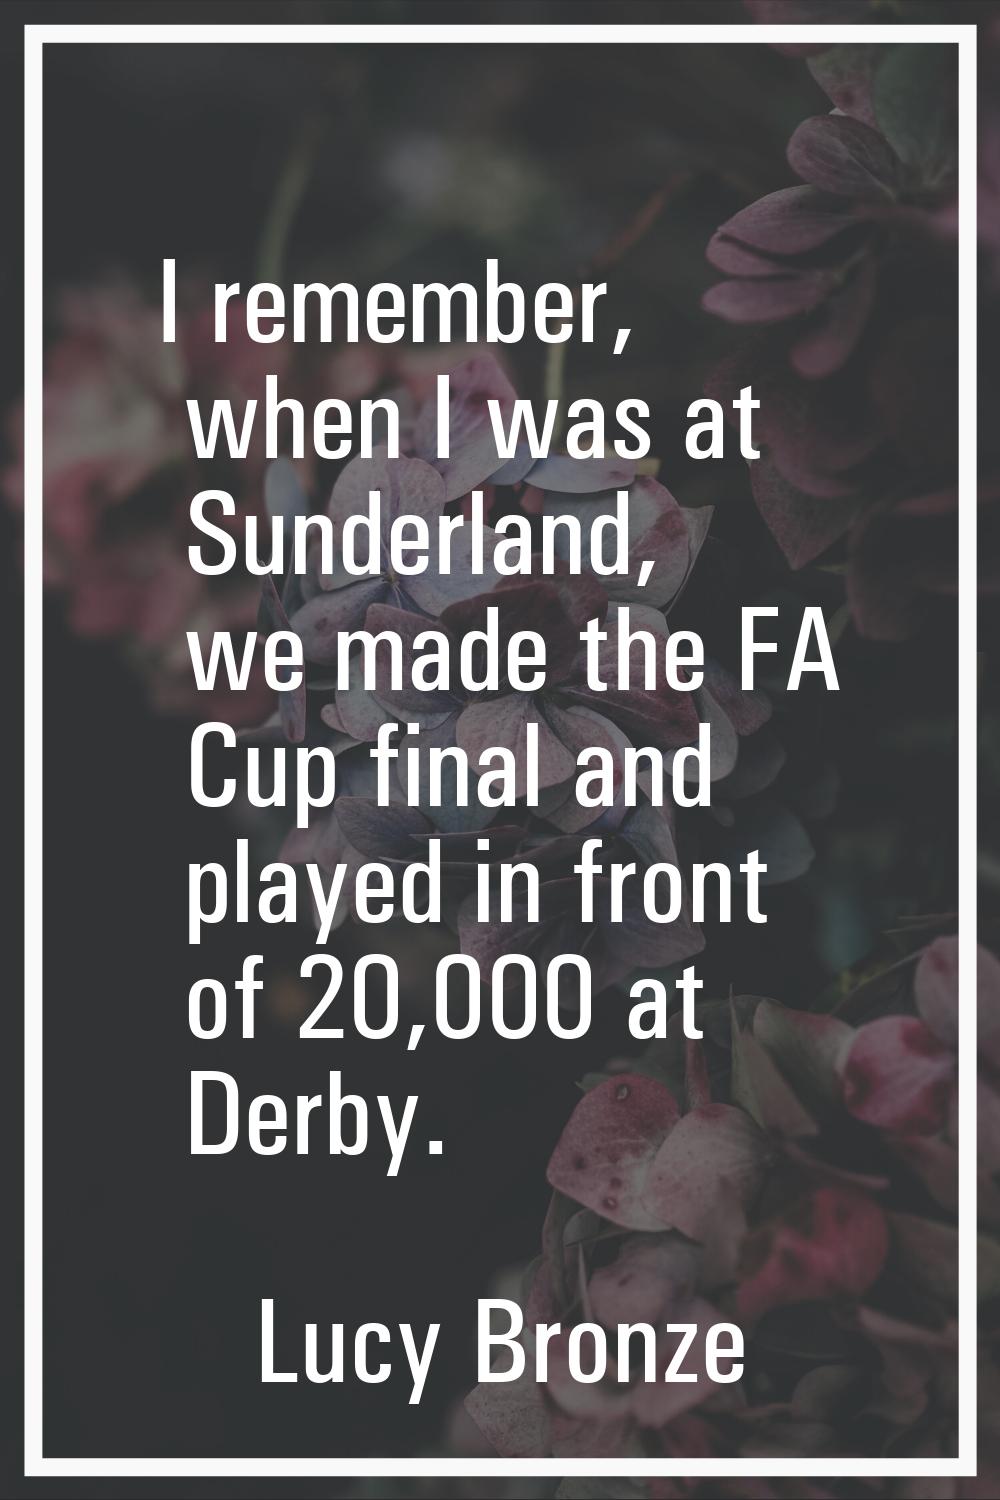 I remember, when I was at Sunderland, we made the FA Cup final and played in front of 20,000 at Der